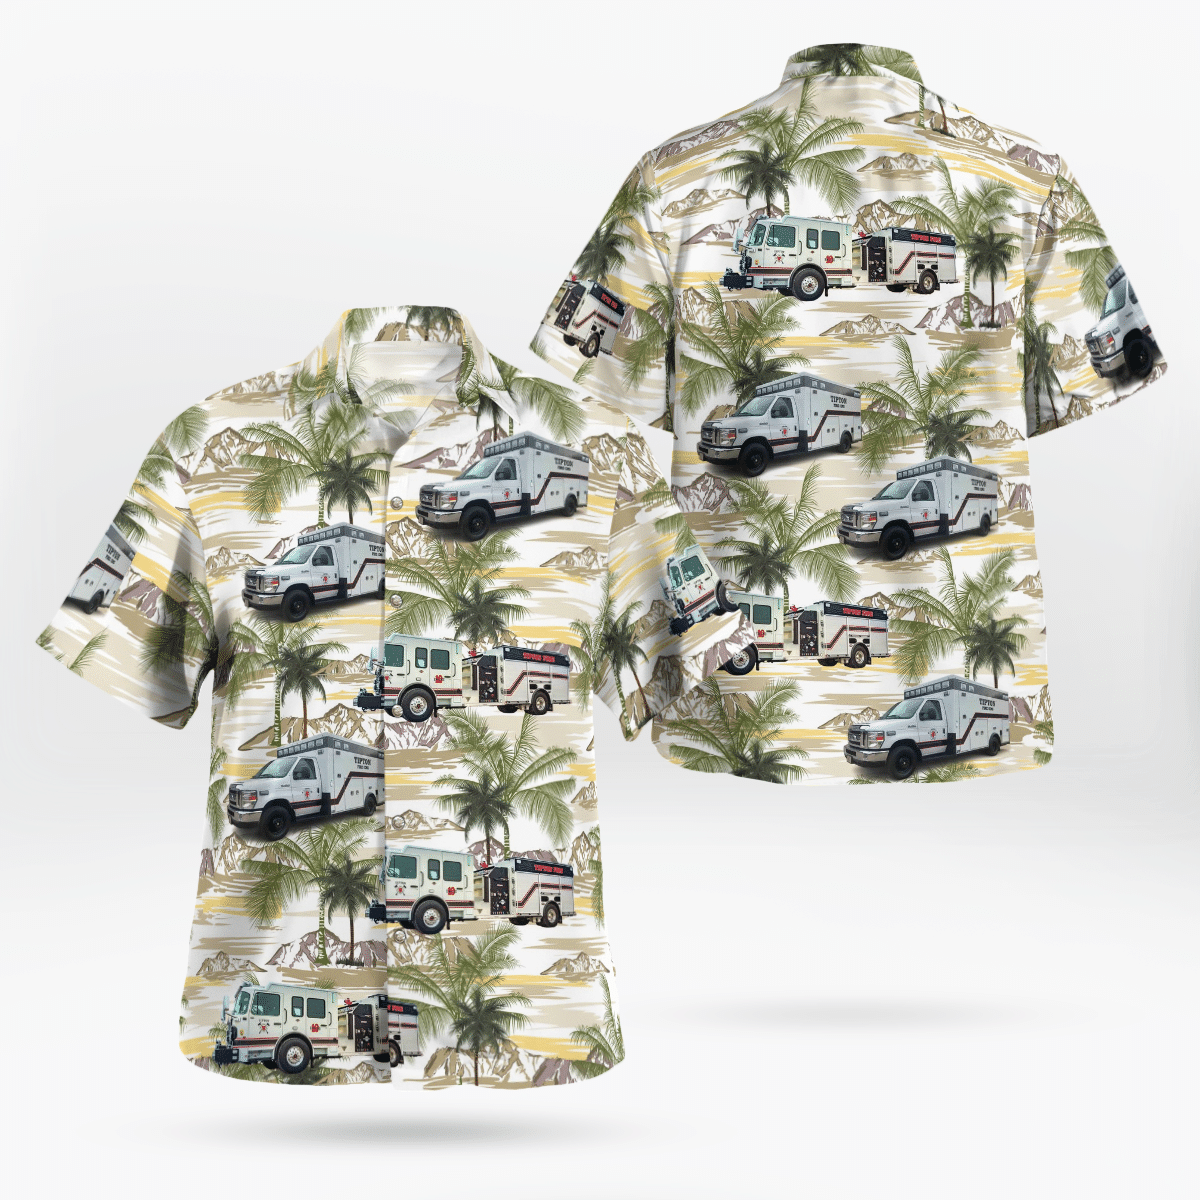 Shop now to find the perfect Hawaii Shirt for your hobby 13